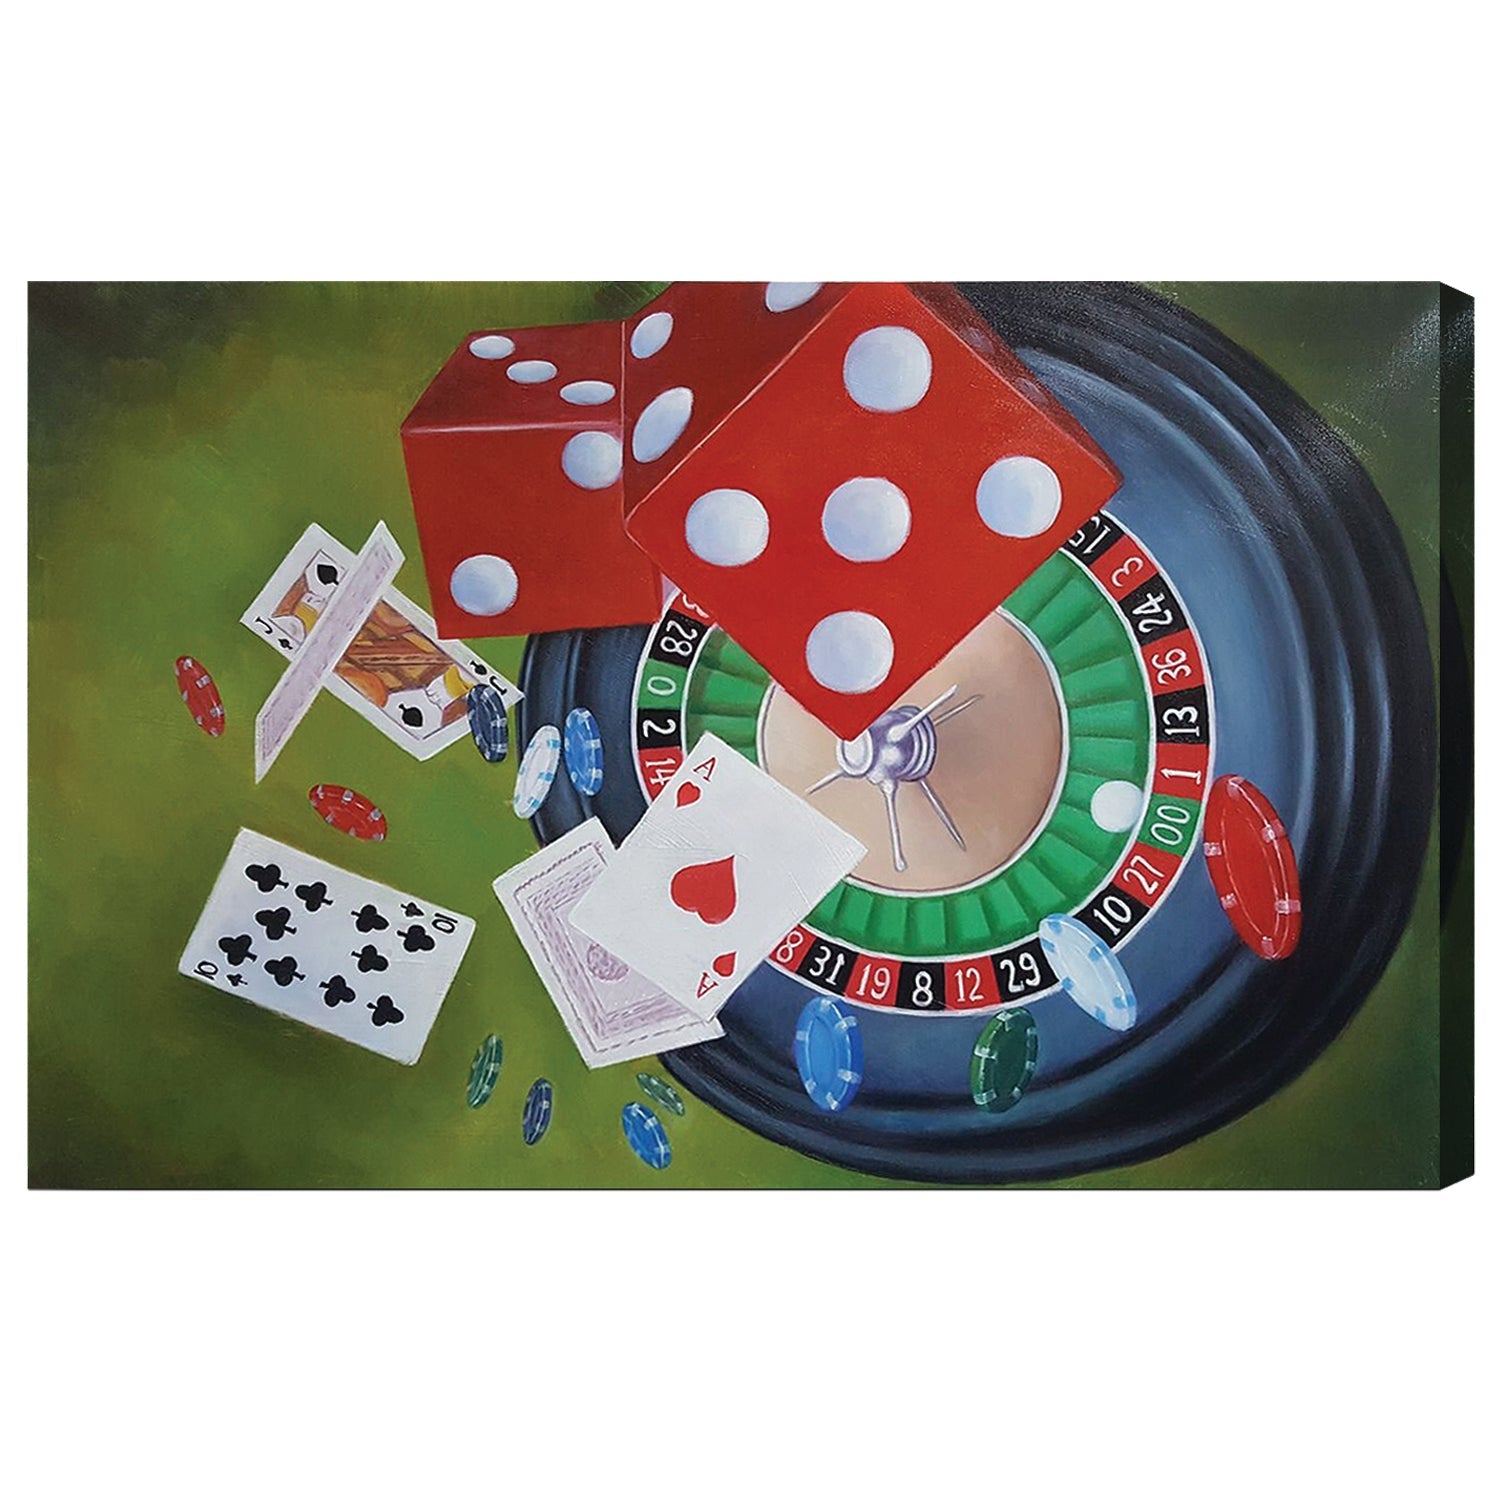 OIL PAINTING ON CANVAS - ROULETTE & DICE-Game Table Genie